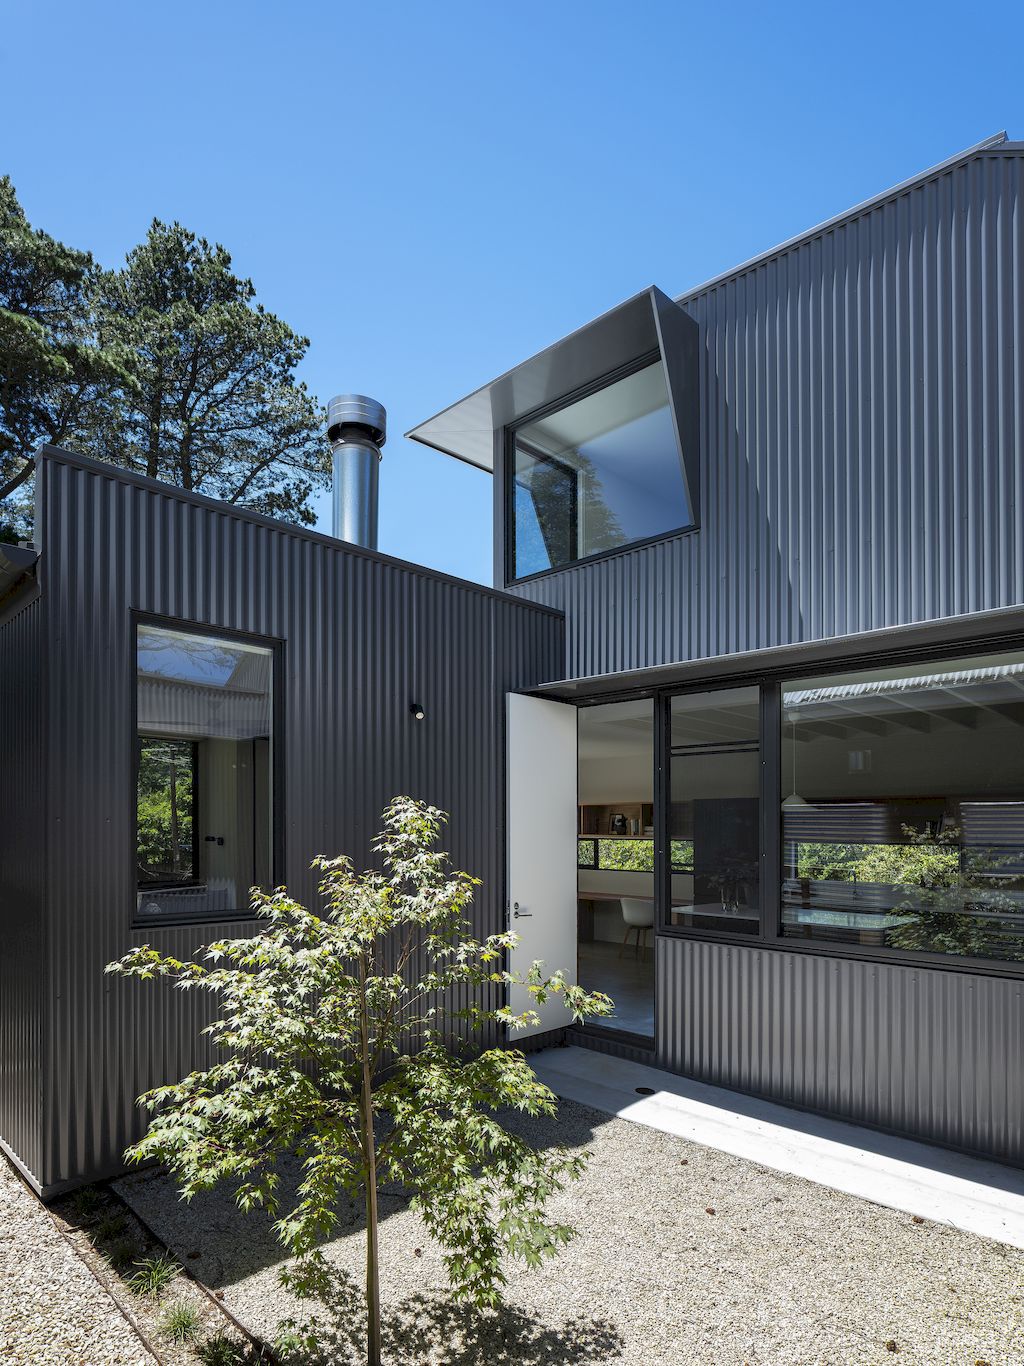 Blackheath courtyard house with prominent facade by Pearson Architecture